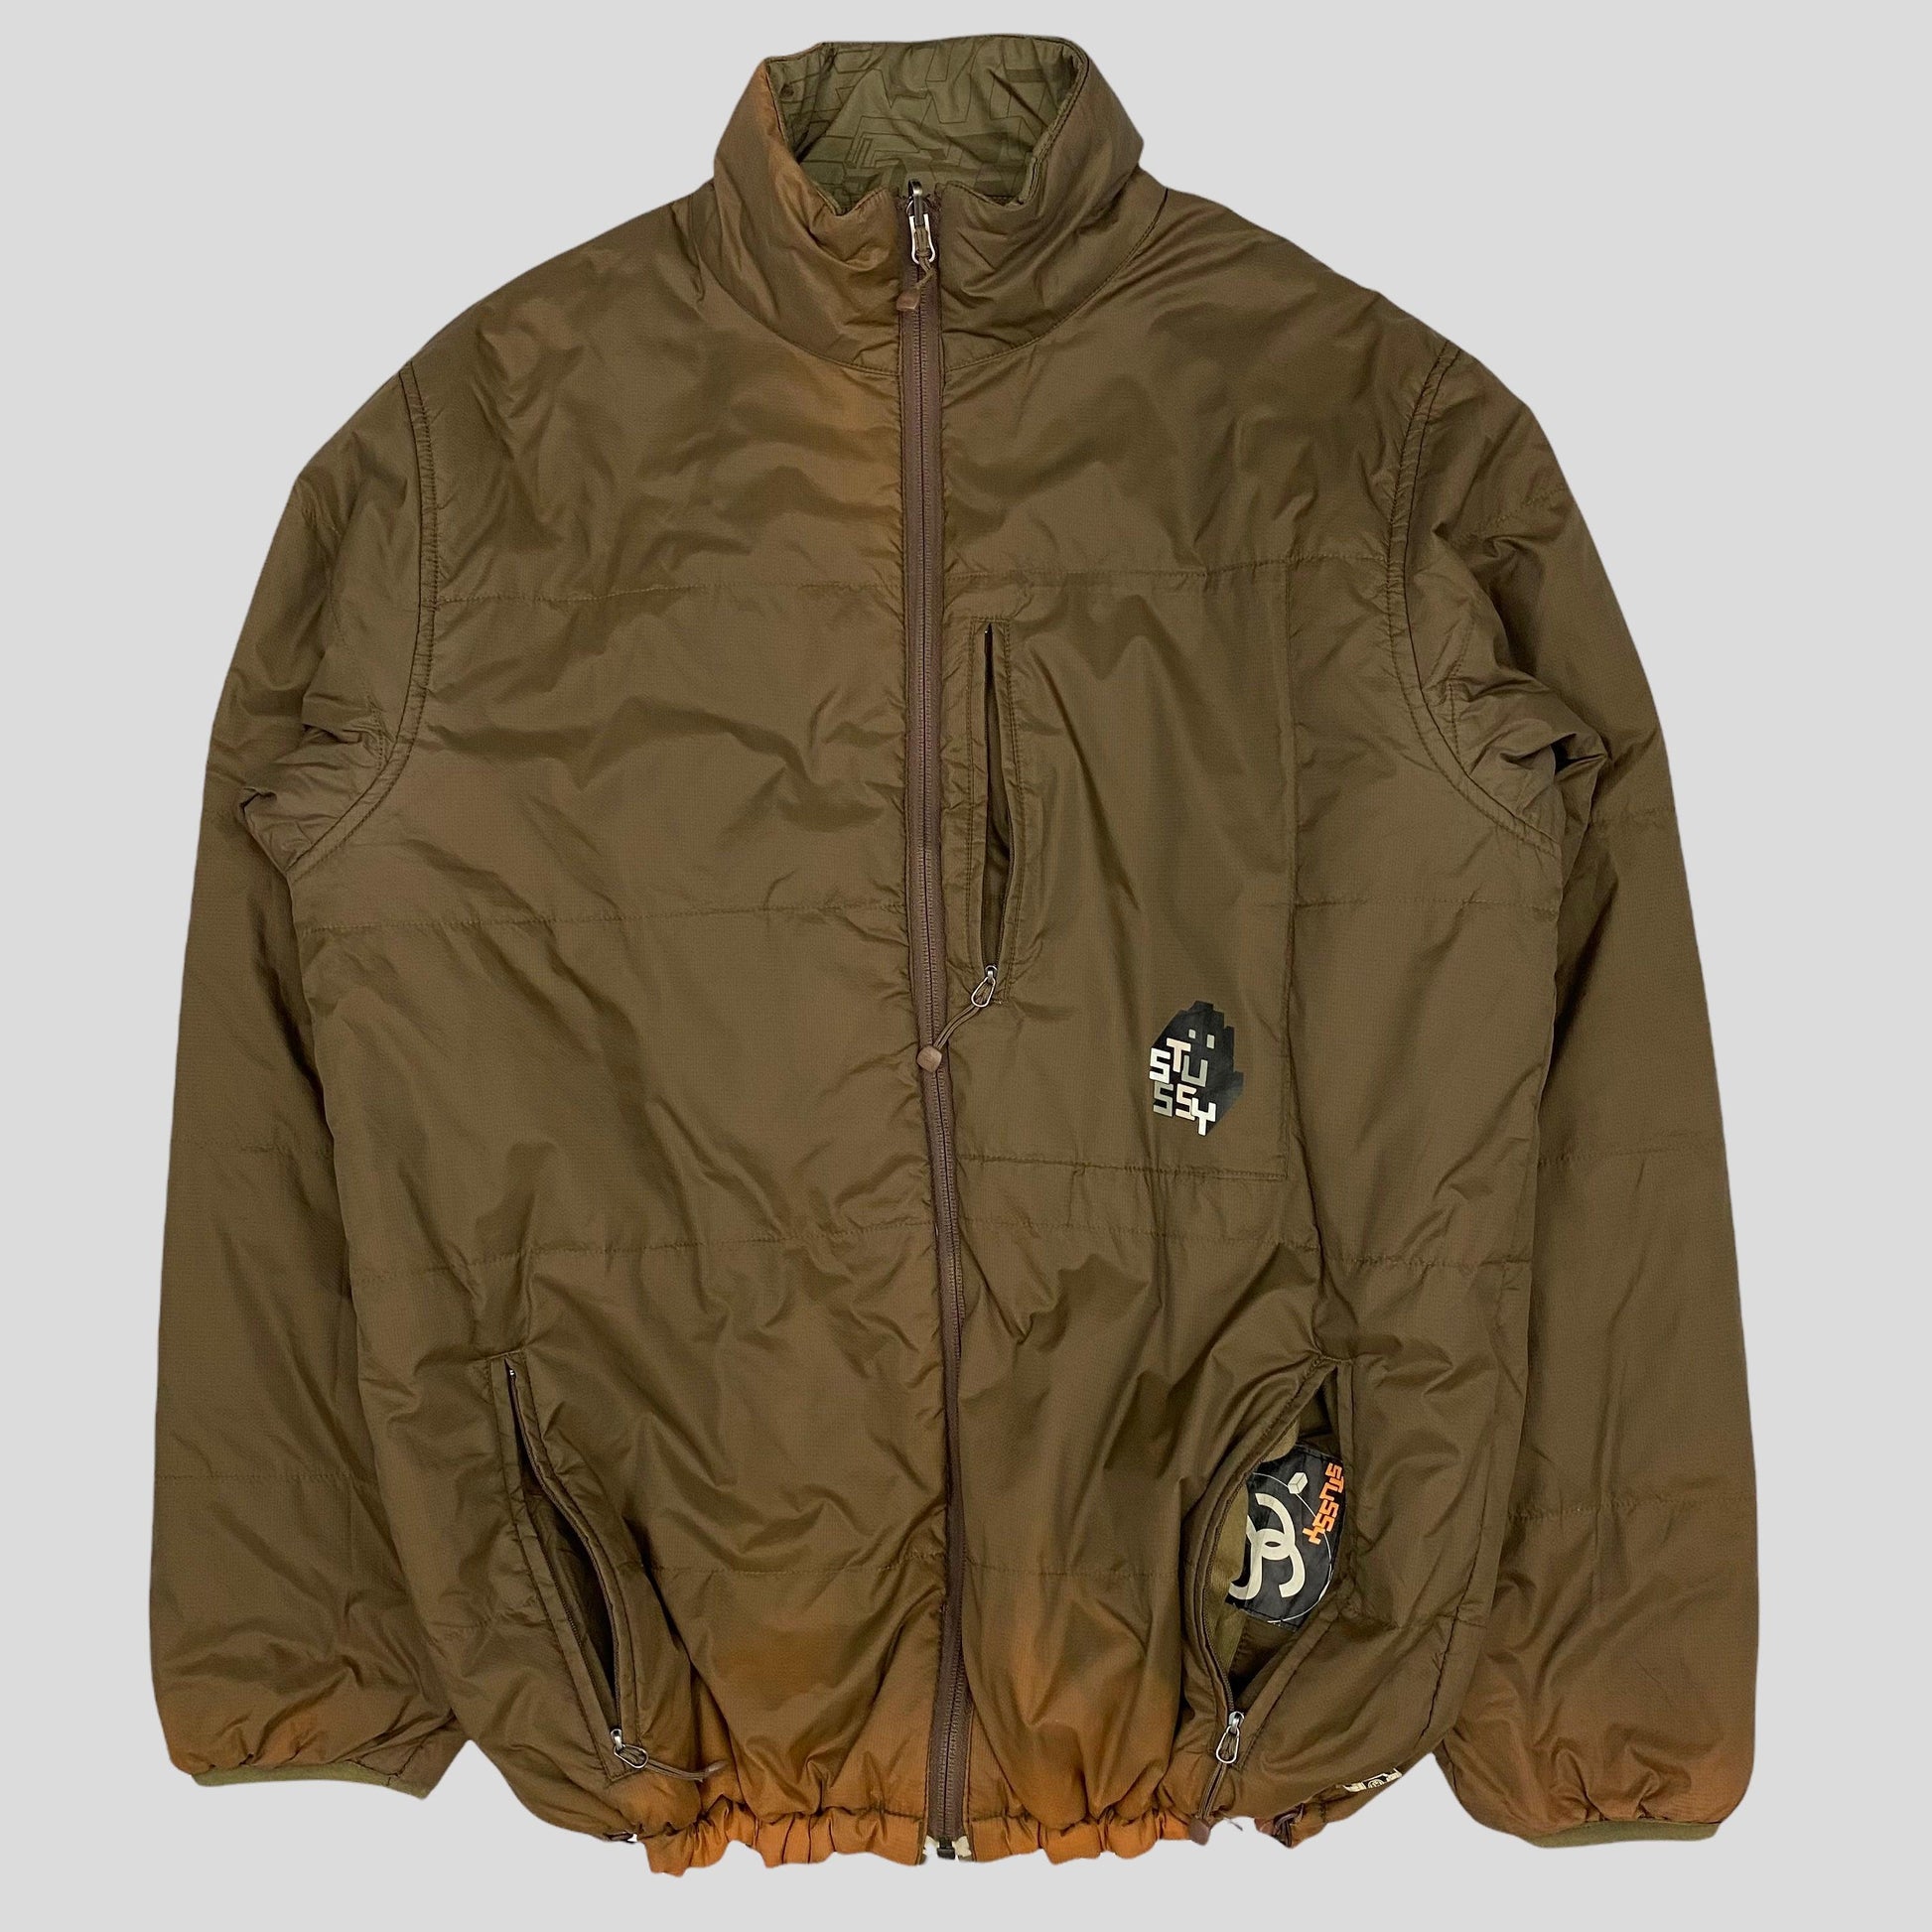 Stussy x Delta 2008 Reversible Puffer - L - Known Source